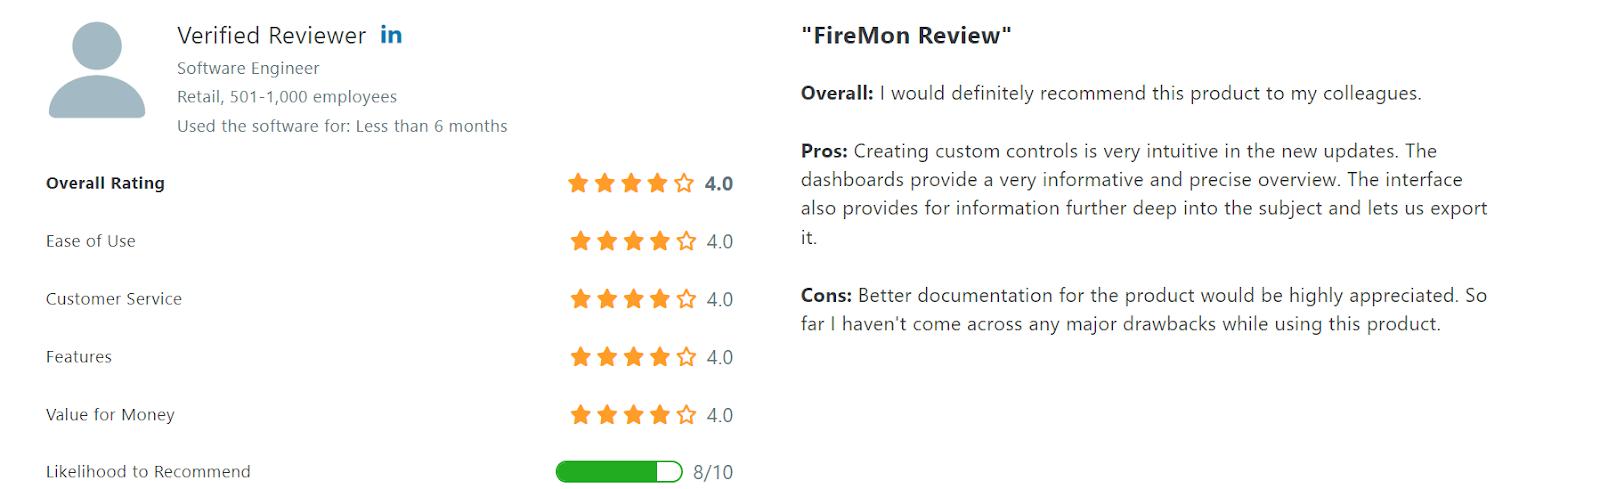 This image shows a user review on FireMon, one of the top firewall management tools.